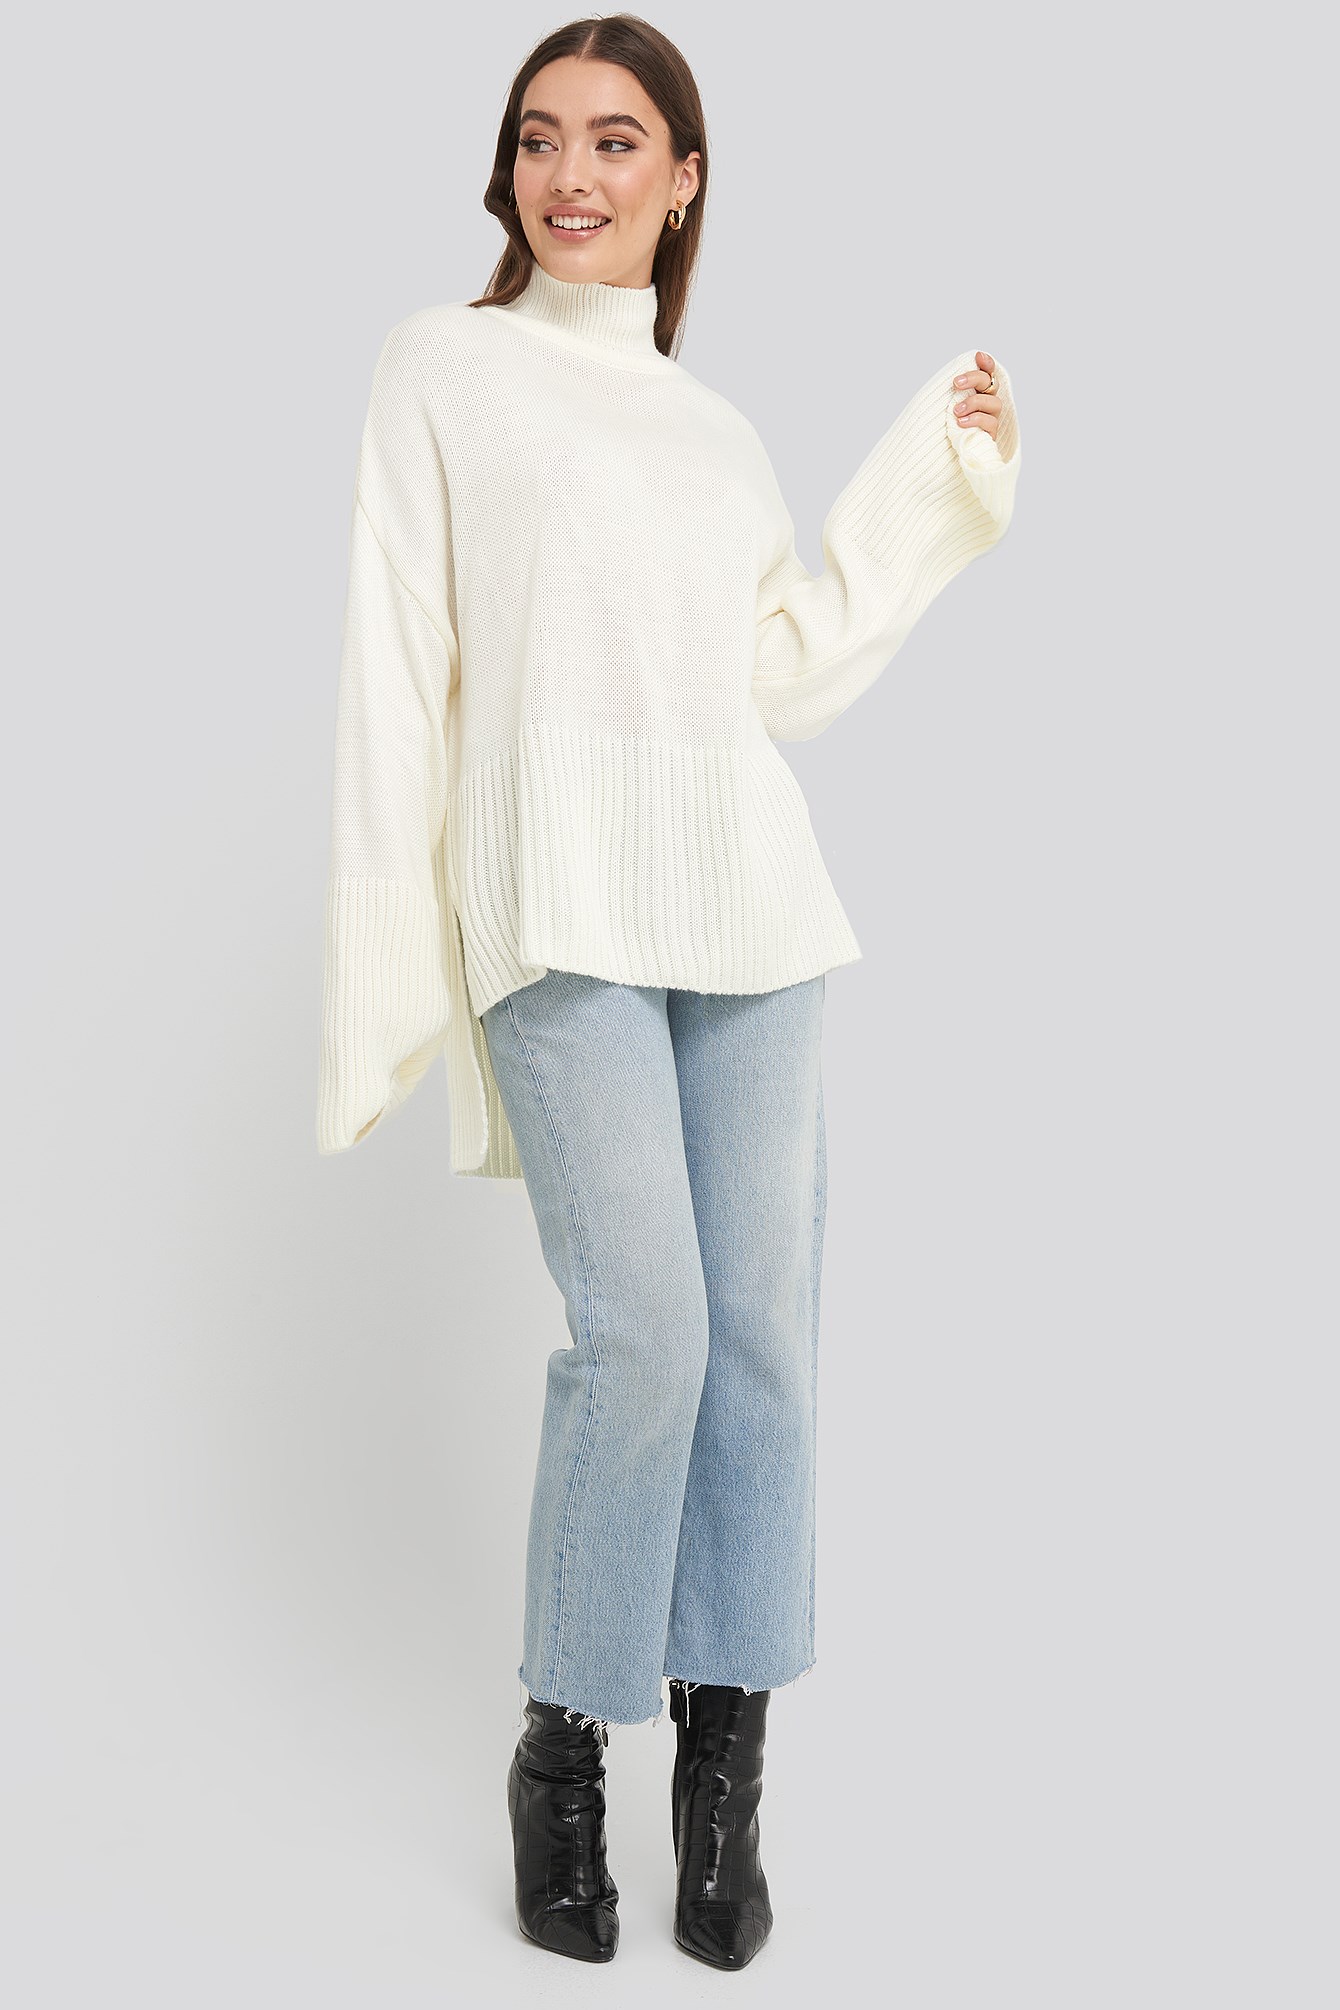 Vertical Neck Sweater White Outfit